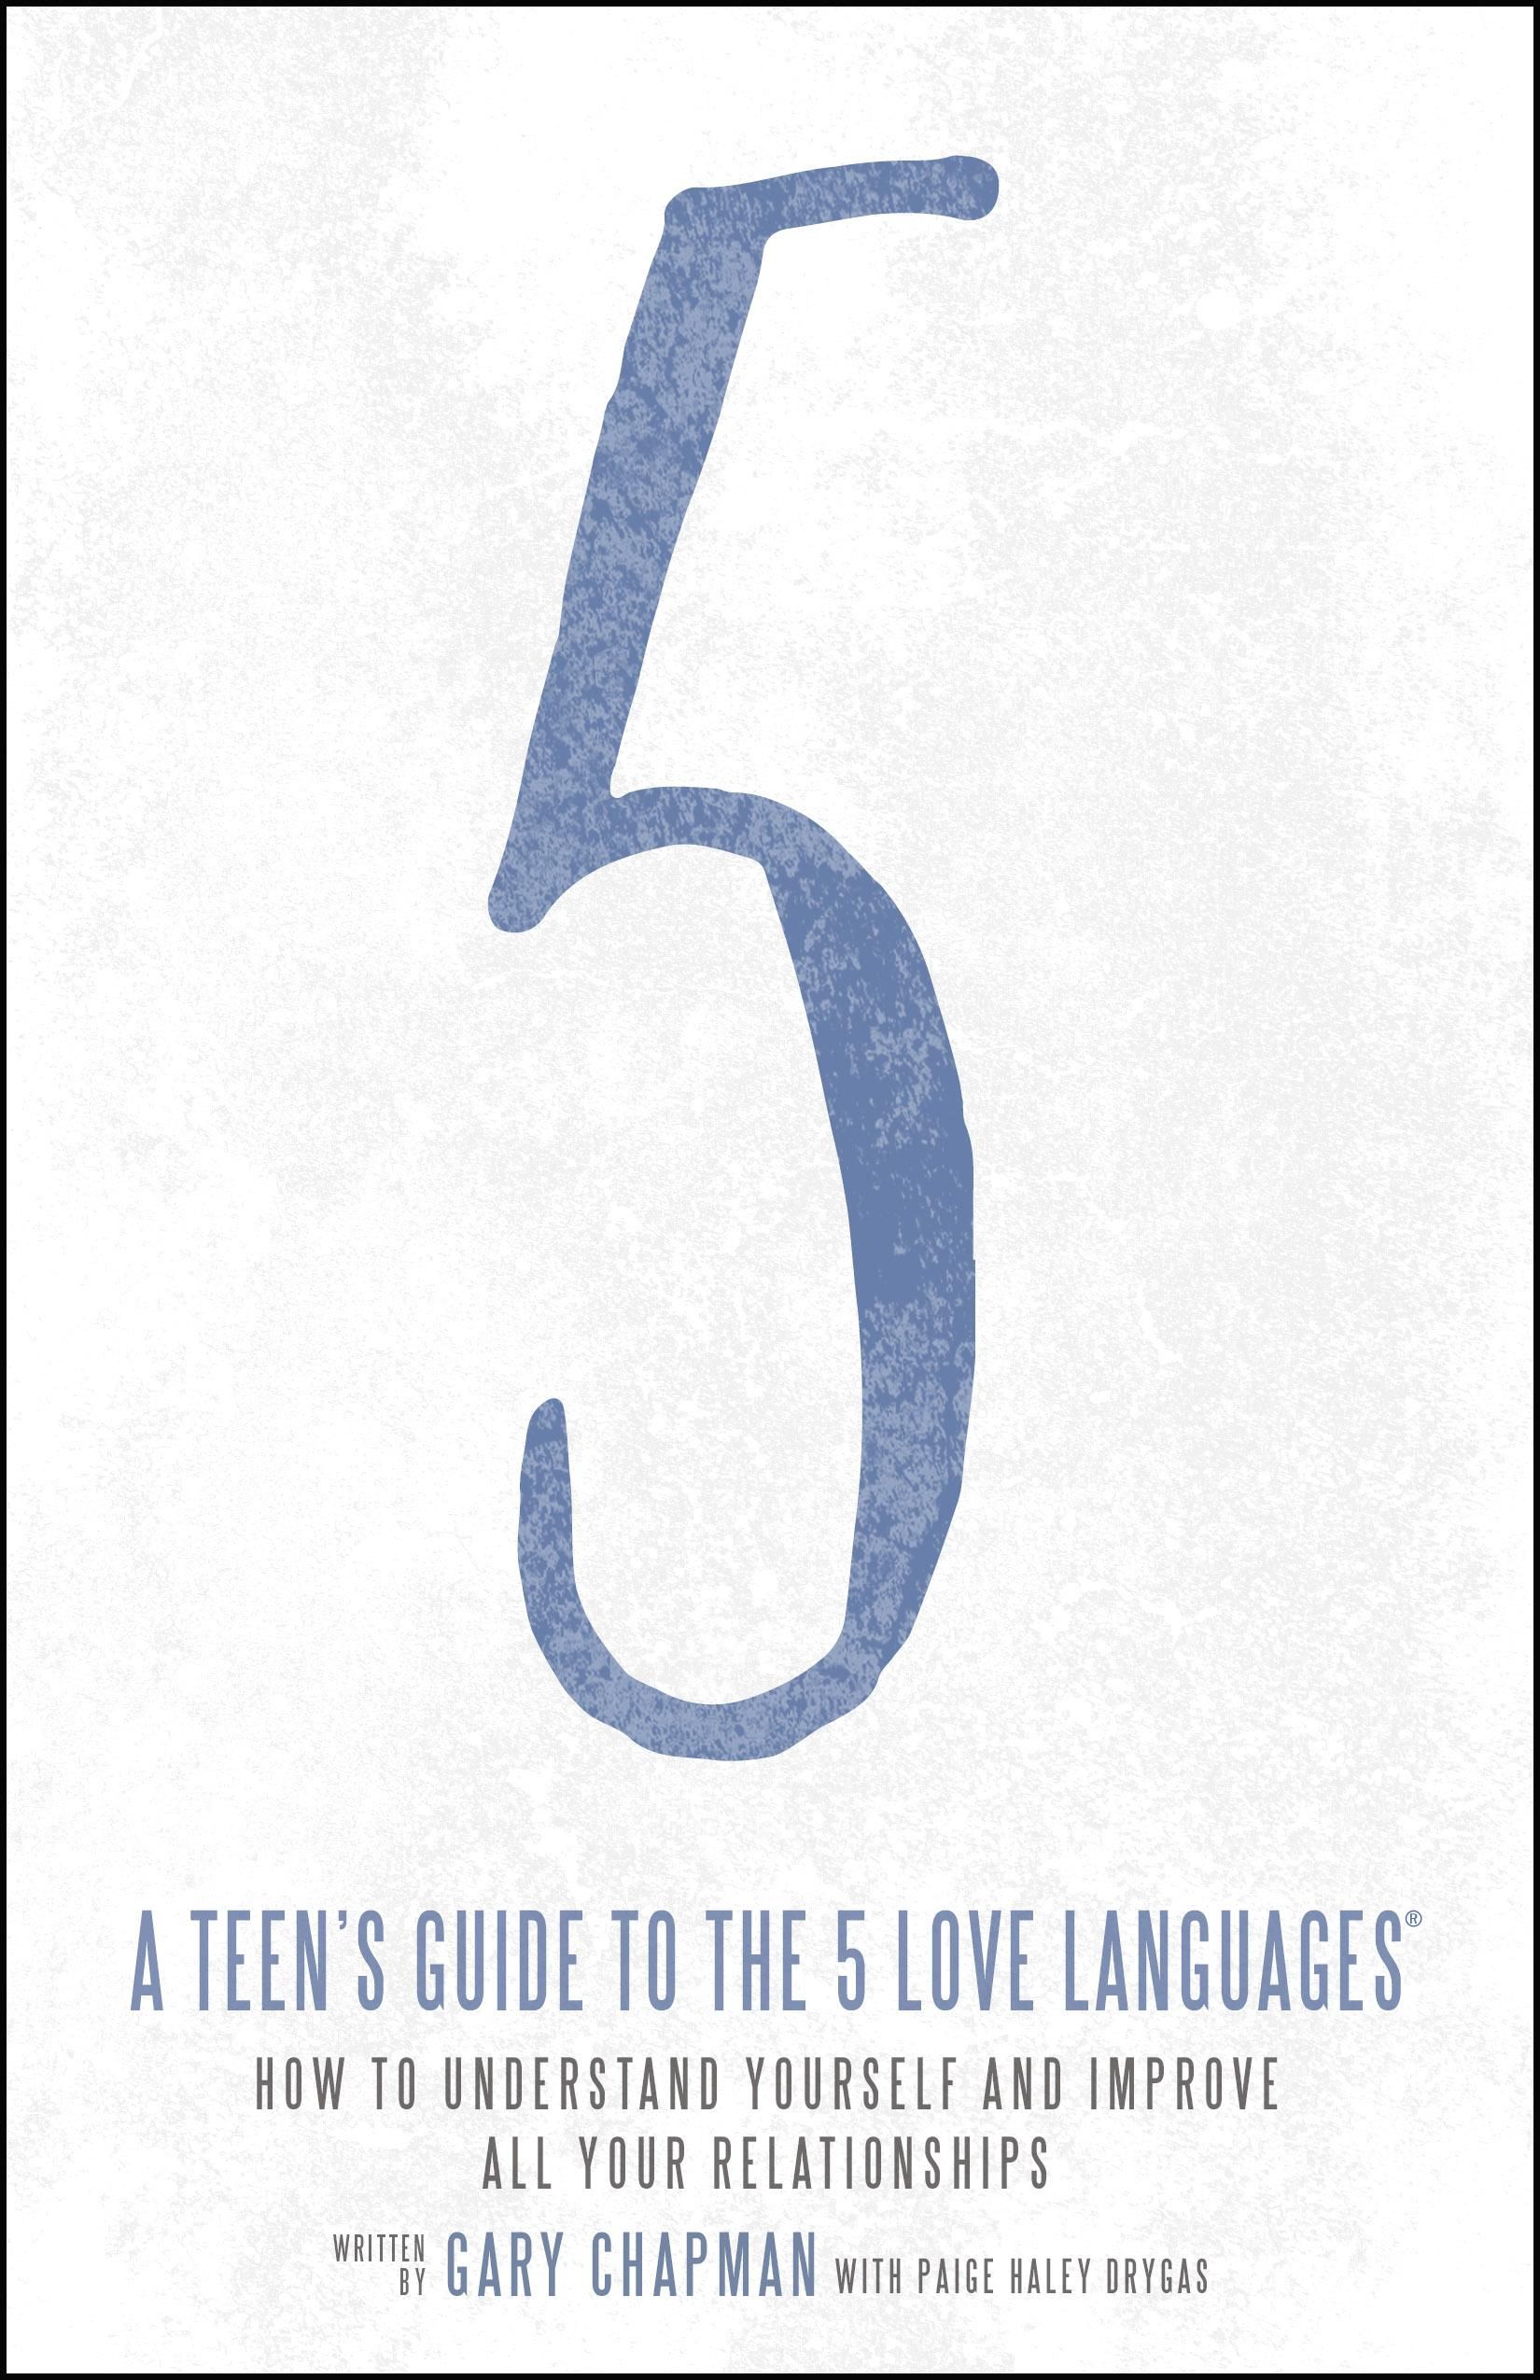 A Teen’s Guide to the 5 Love Languages